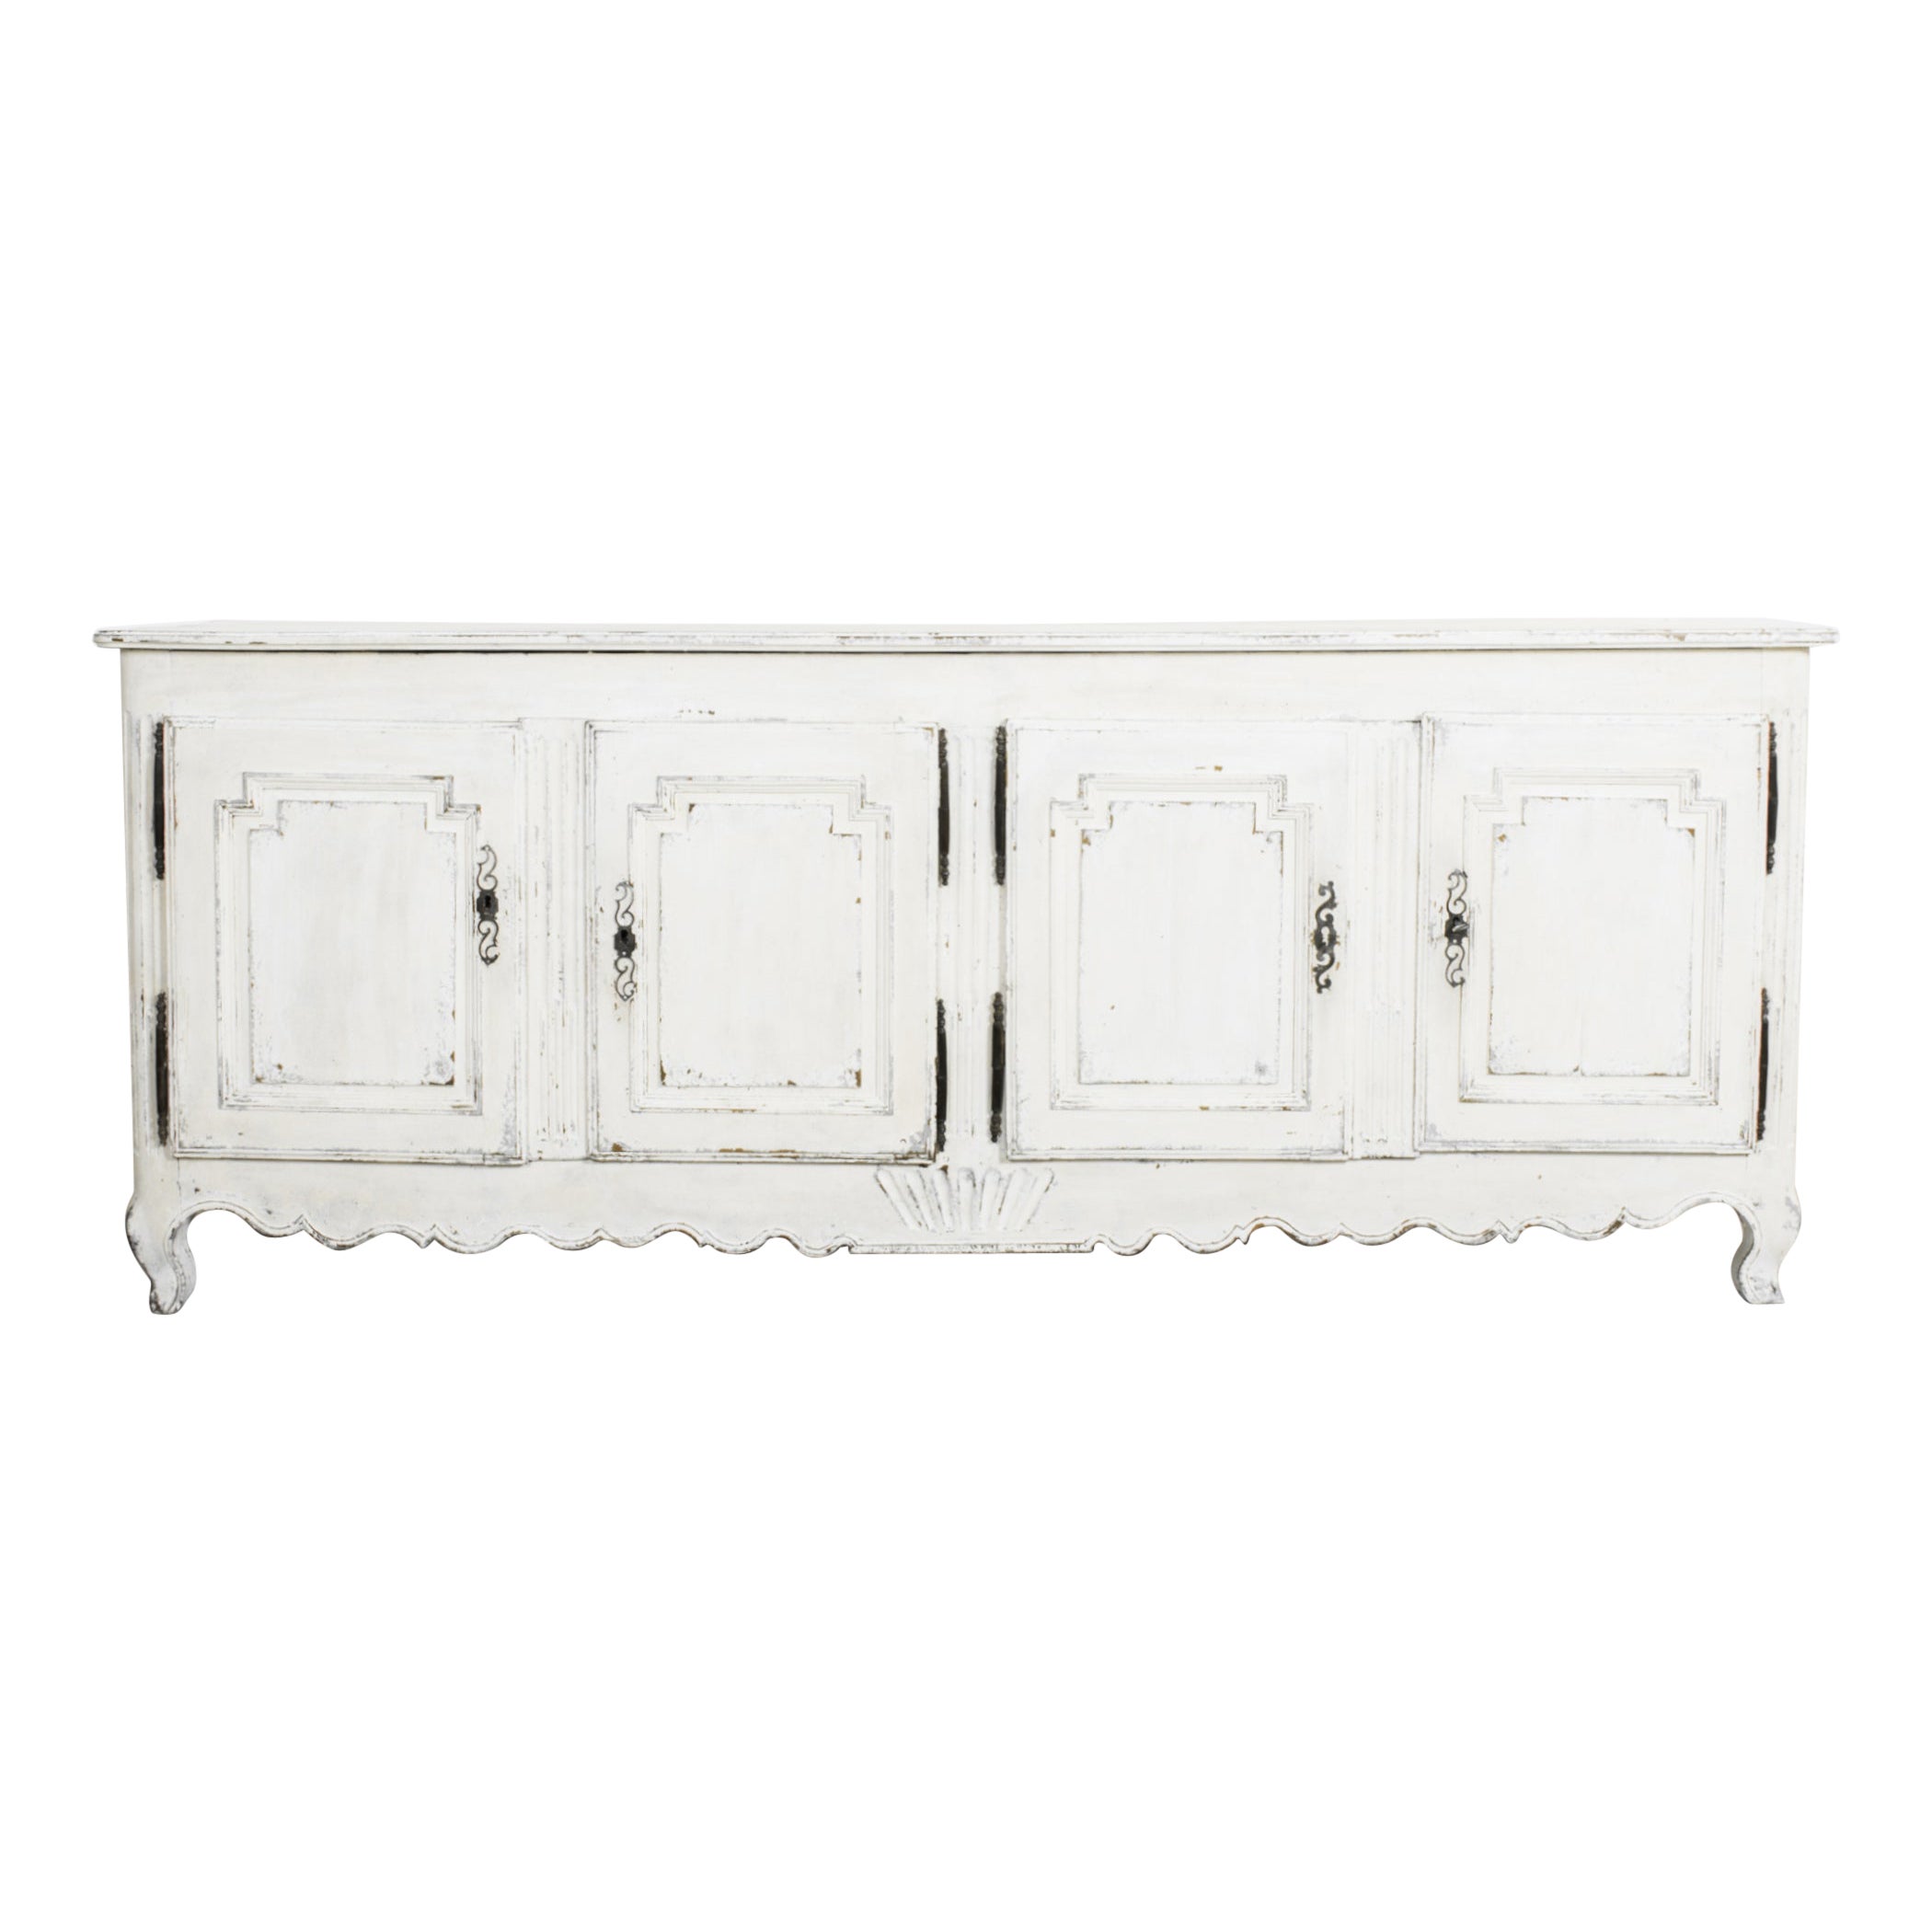 1850s French Provincial Buffet